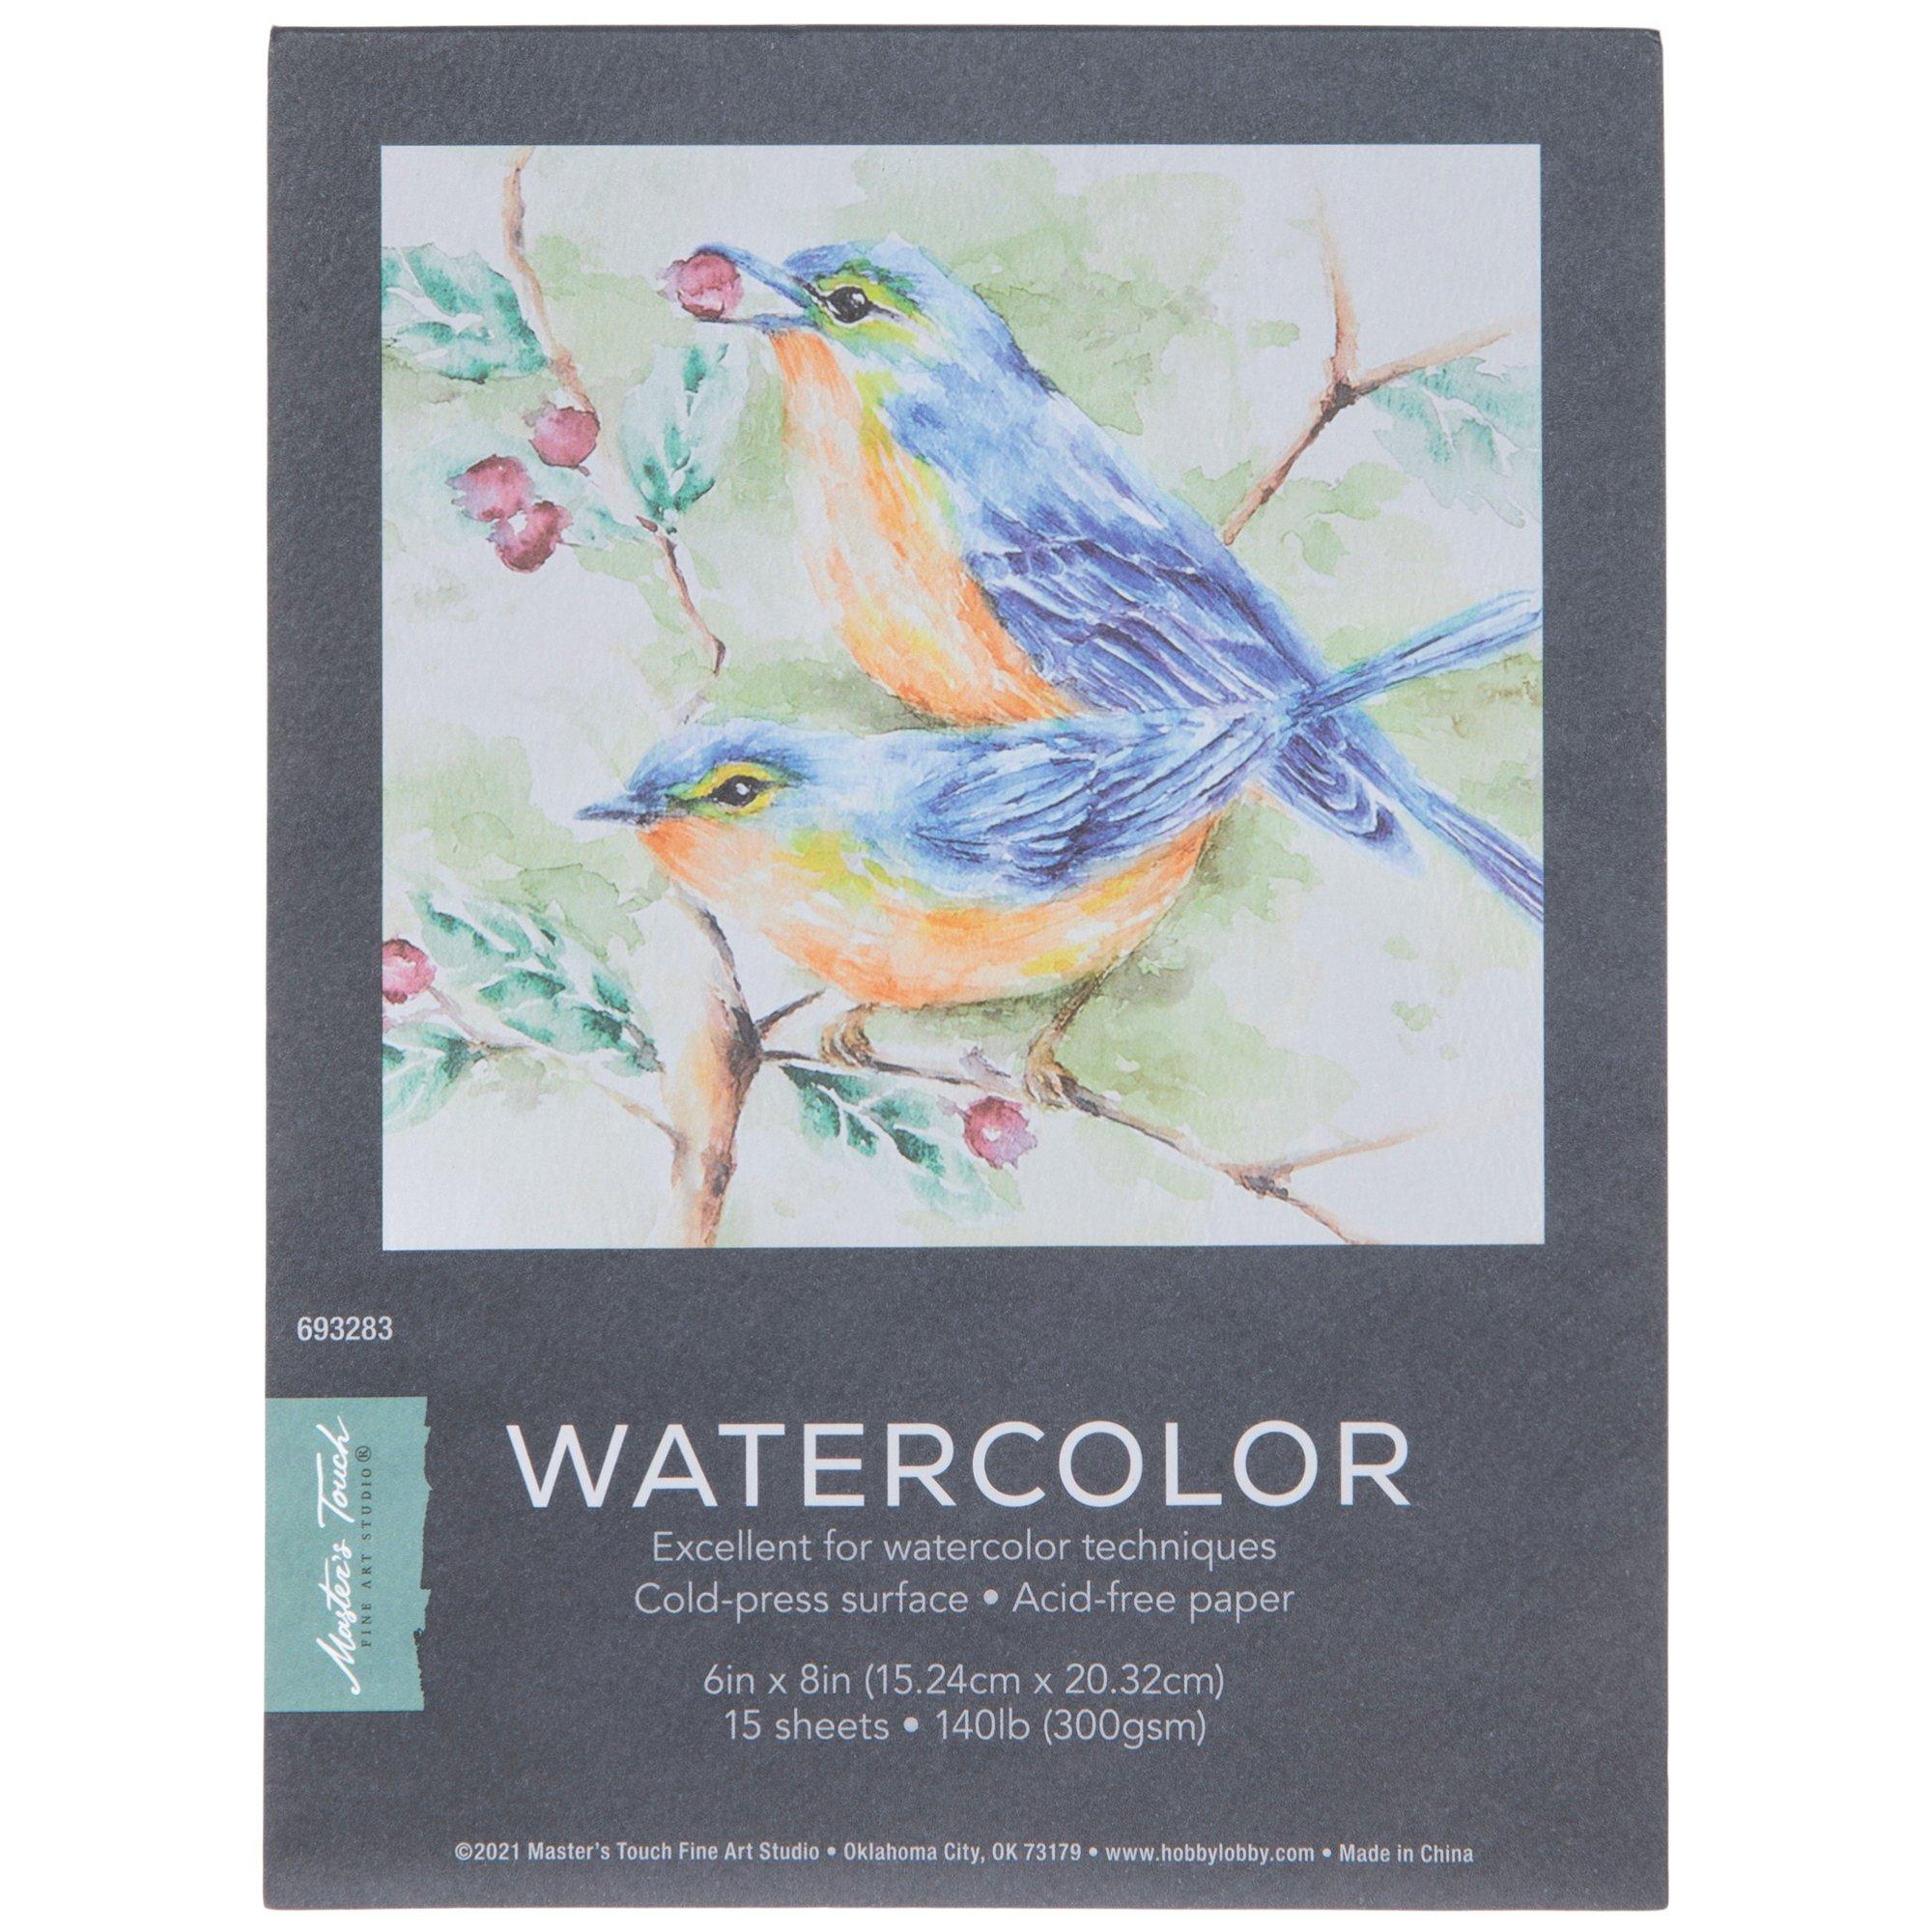 Baohong Artists' Watercolor Painting Block, Pack of 2, 40 Sheets 100% Cotton, Acid-free, 140lb/300gsm, Cold Press Textured, Ideal for Watercolor